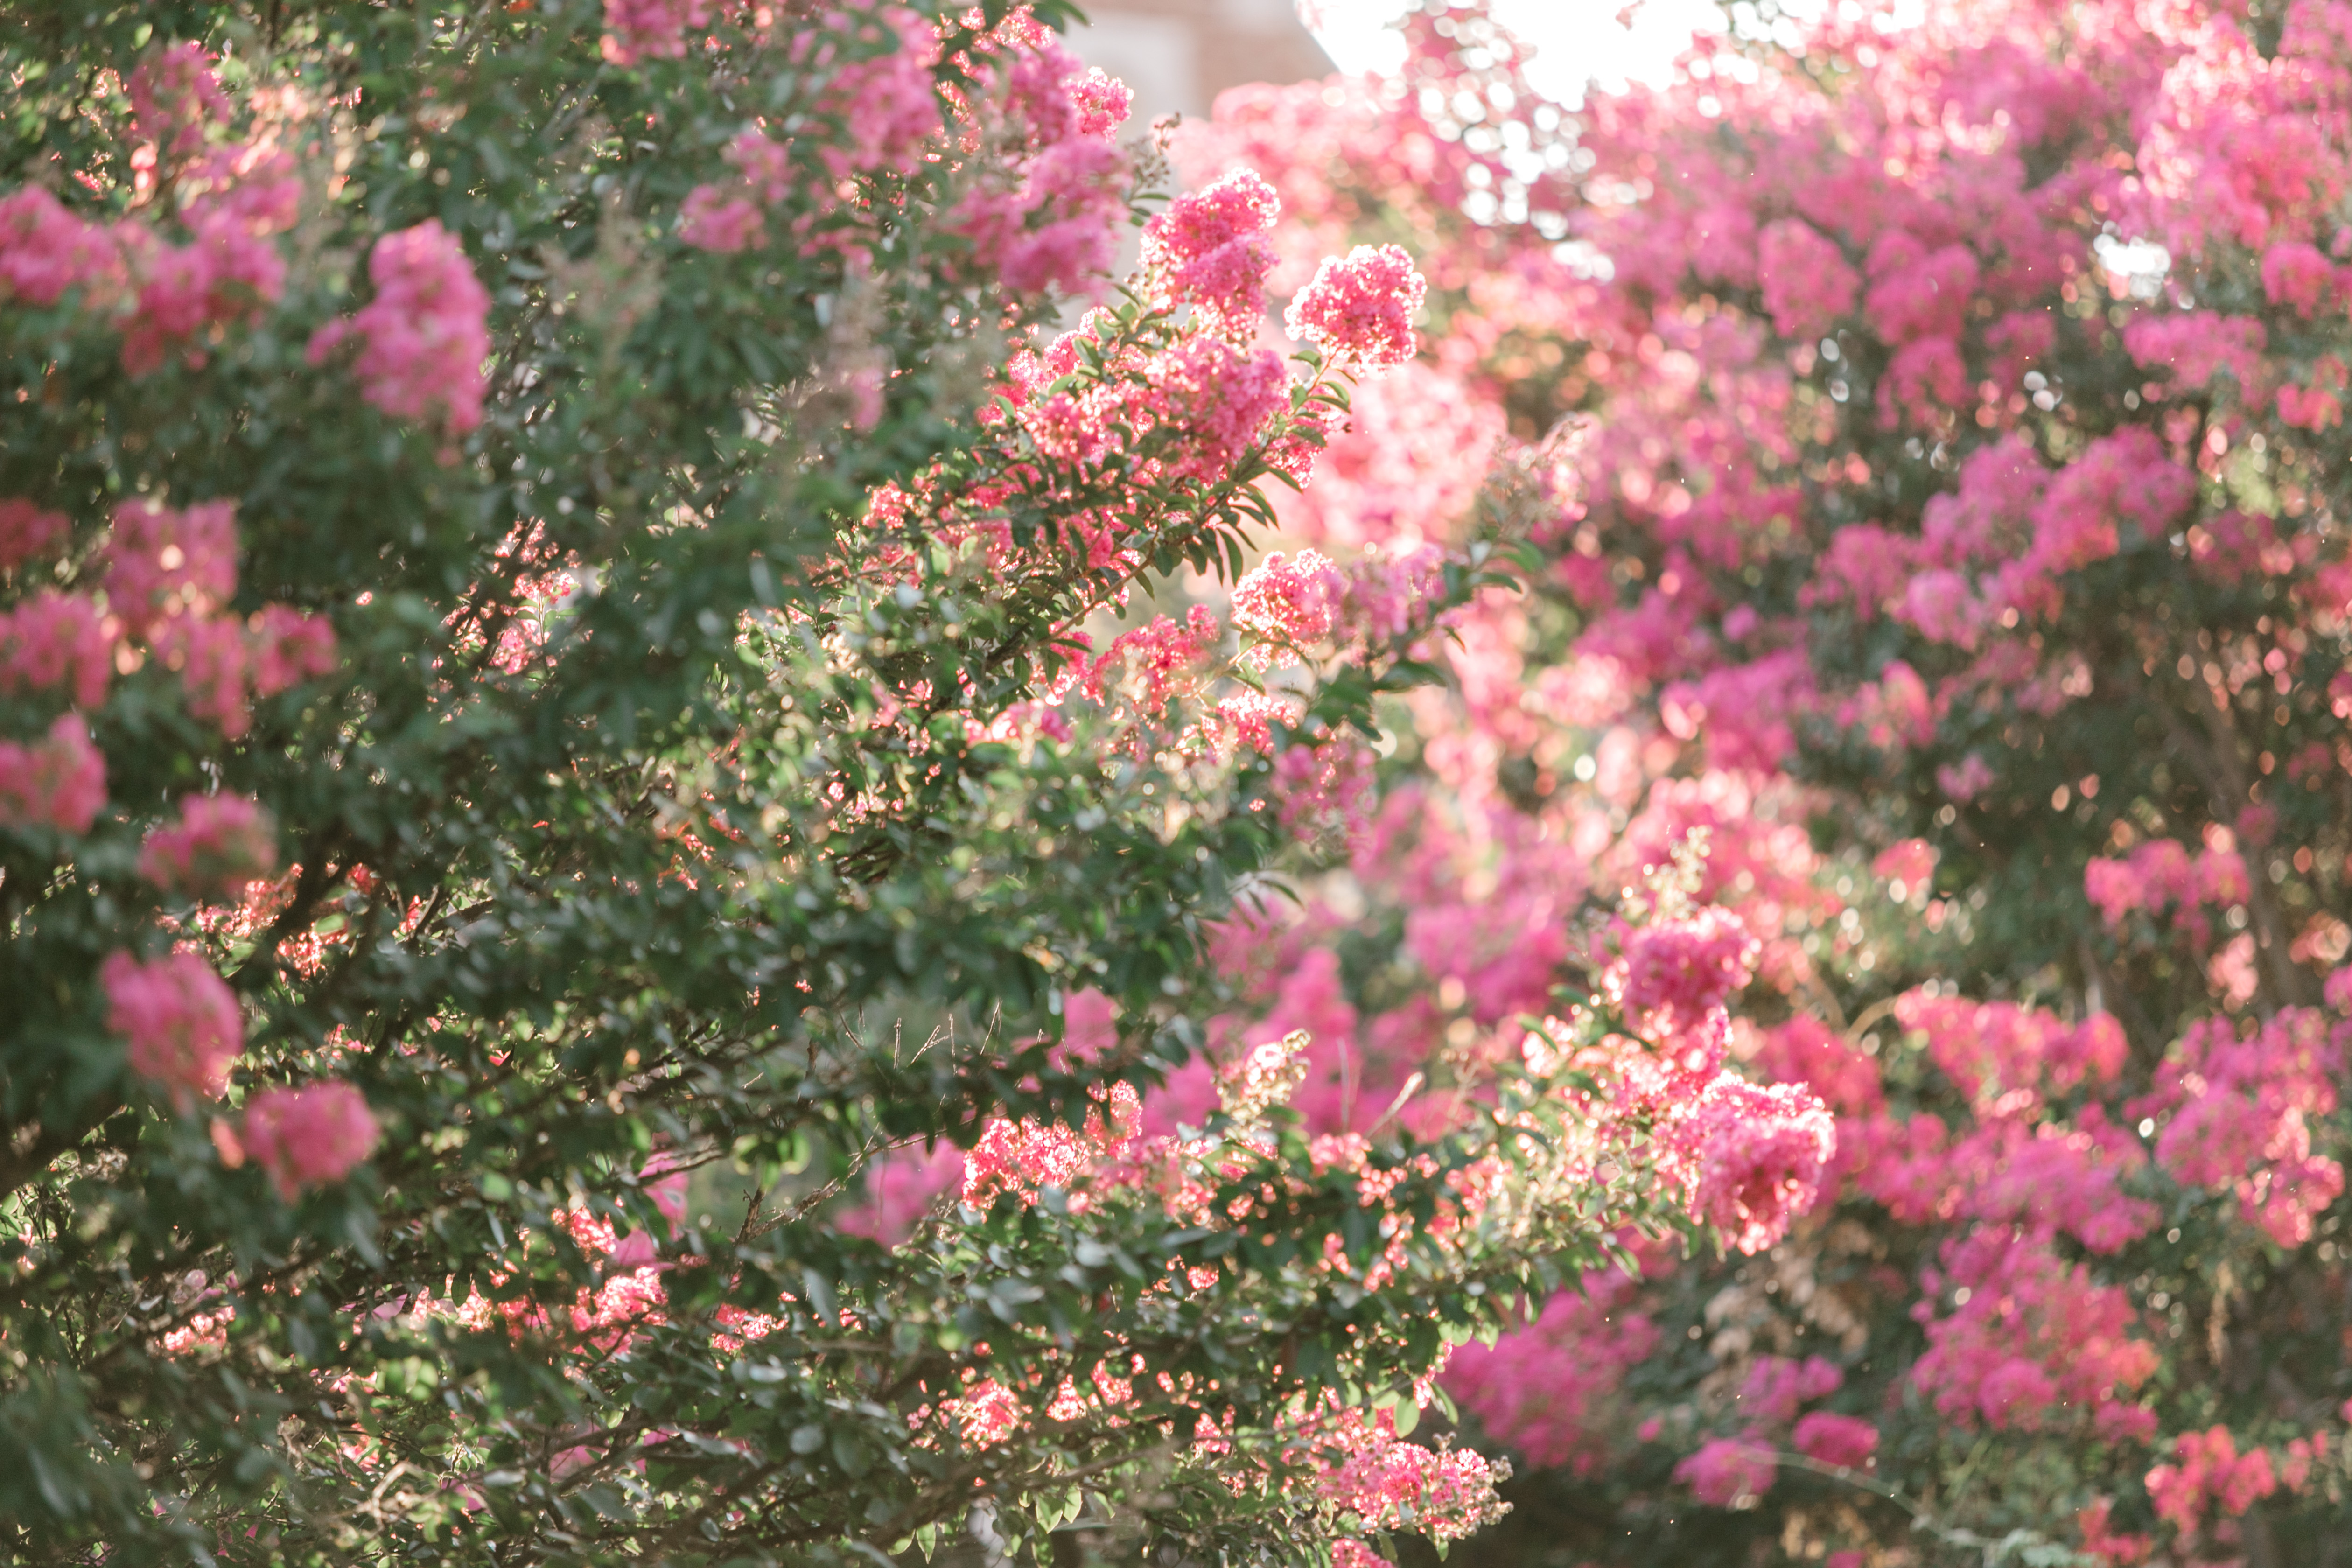 Photos of OU Campus - Crepe Myrtles in bloom